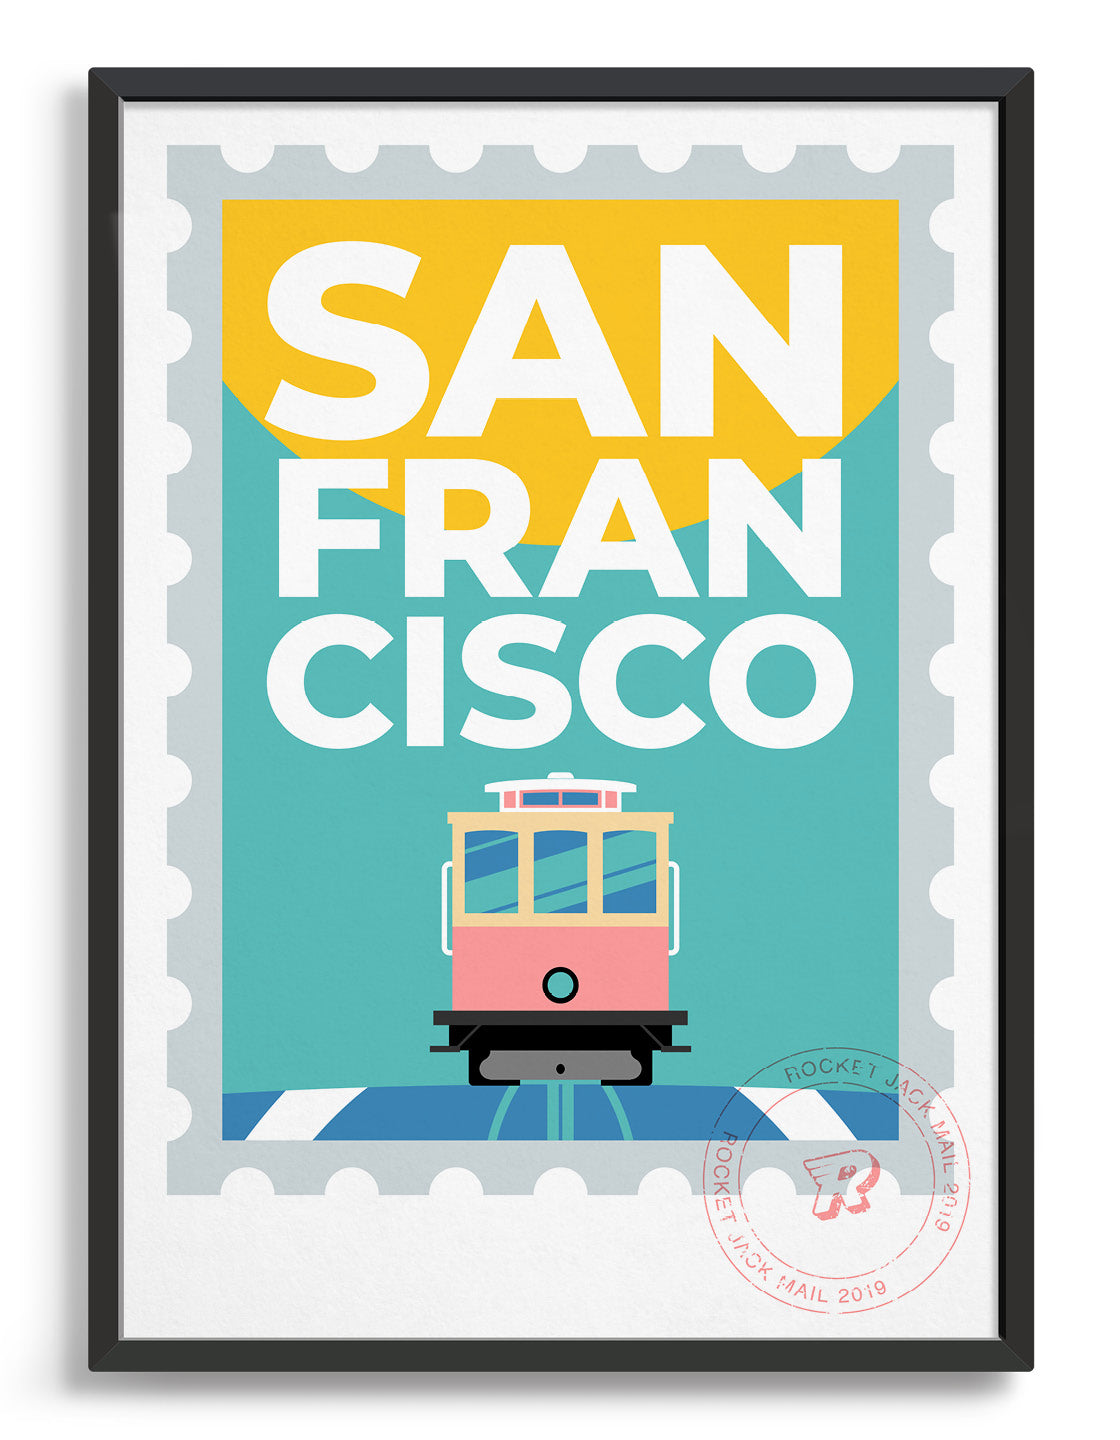 San Francisco stamp style travel poster featuring tram and city text on a bright background